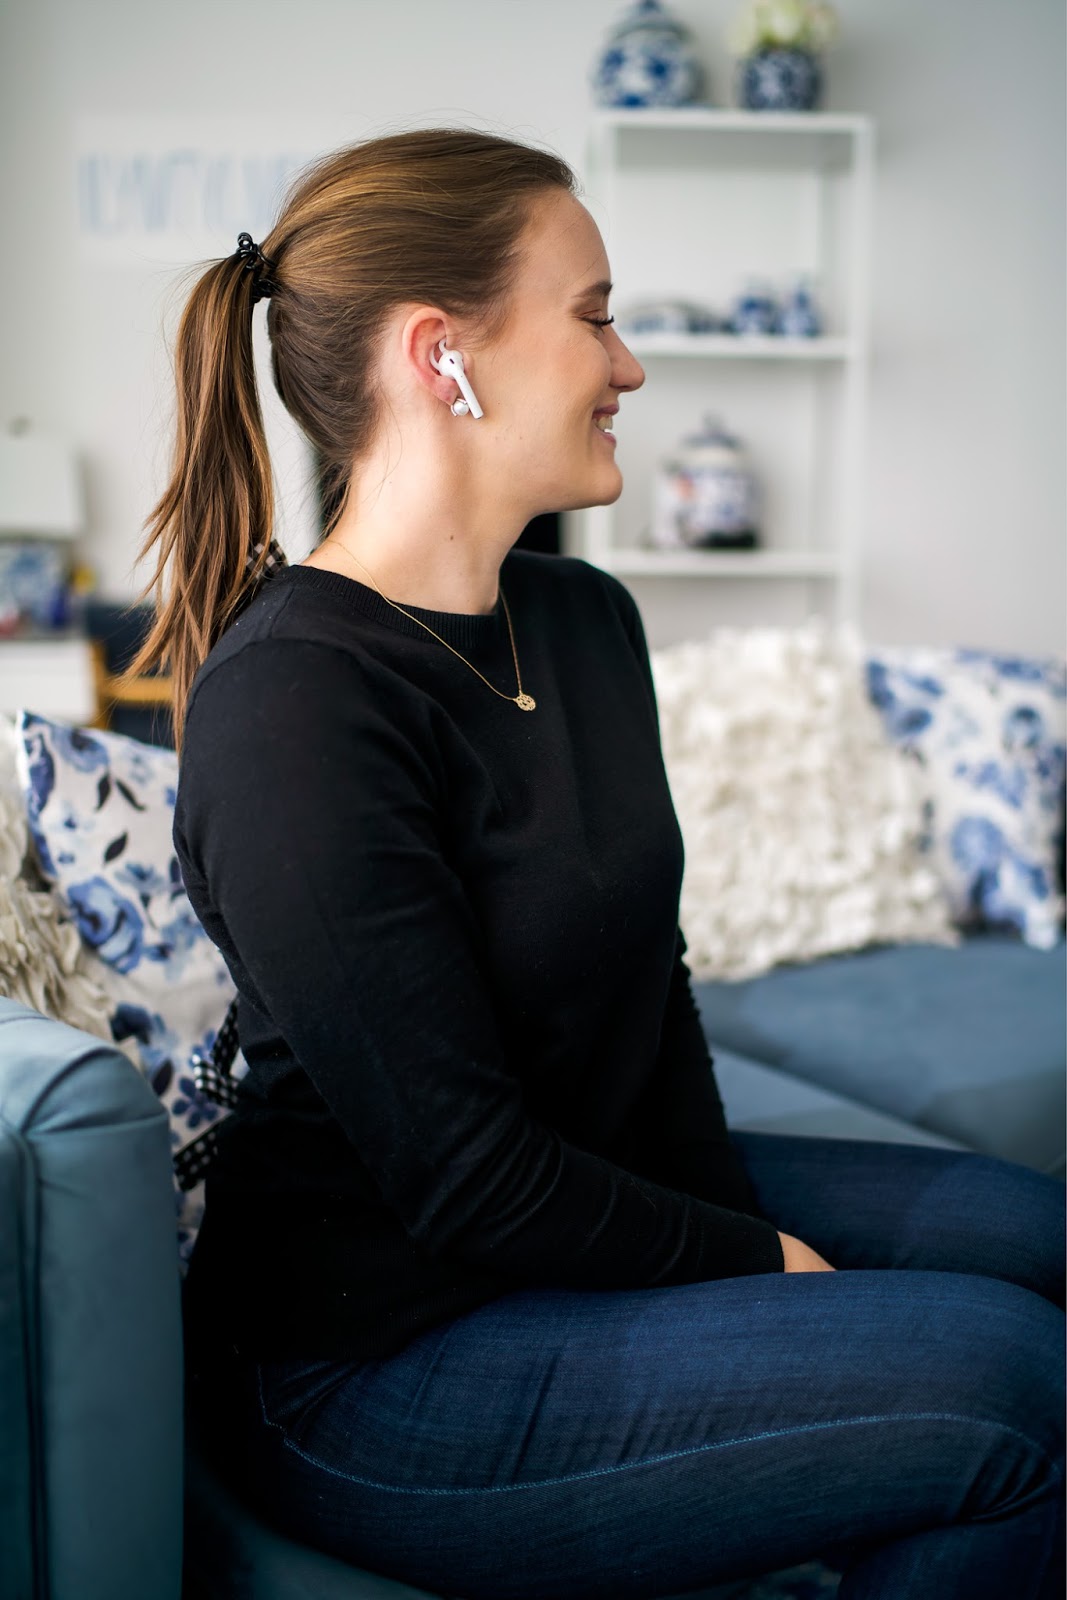 AirPod Review by popular New York lifestyle blogger Covering the Bases